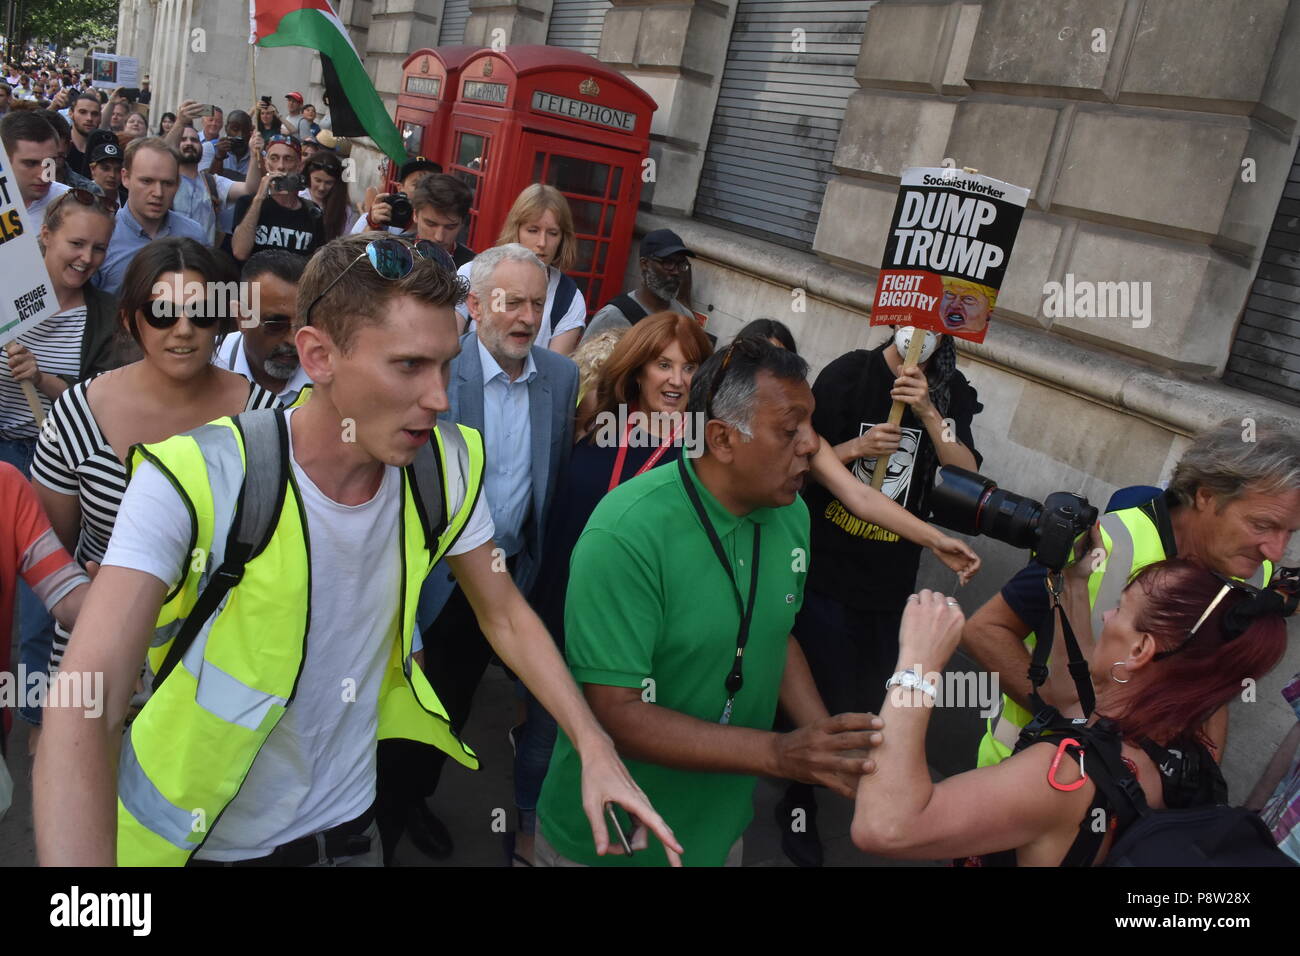 London's beloved leader of the Labour party Jeremy Corbyn takes to the streets of London on foot with very little security as he makes his way towards Leicester Square where he gave a speech in front of the thousands of people who had descended upon London today to protest the visit from American President Donald Trump. Corbyn was greeted with smiles and cheers as he once again literally rubbed shoulders with the people of London as he made his way while the crowd sang his name repeatedly along  Parliament Street past Whitehall towards the Trump protesters Stock Photo